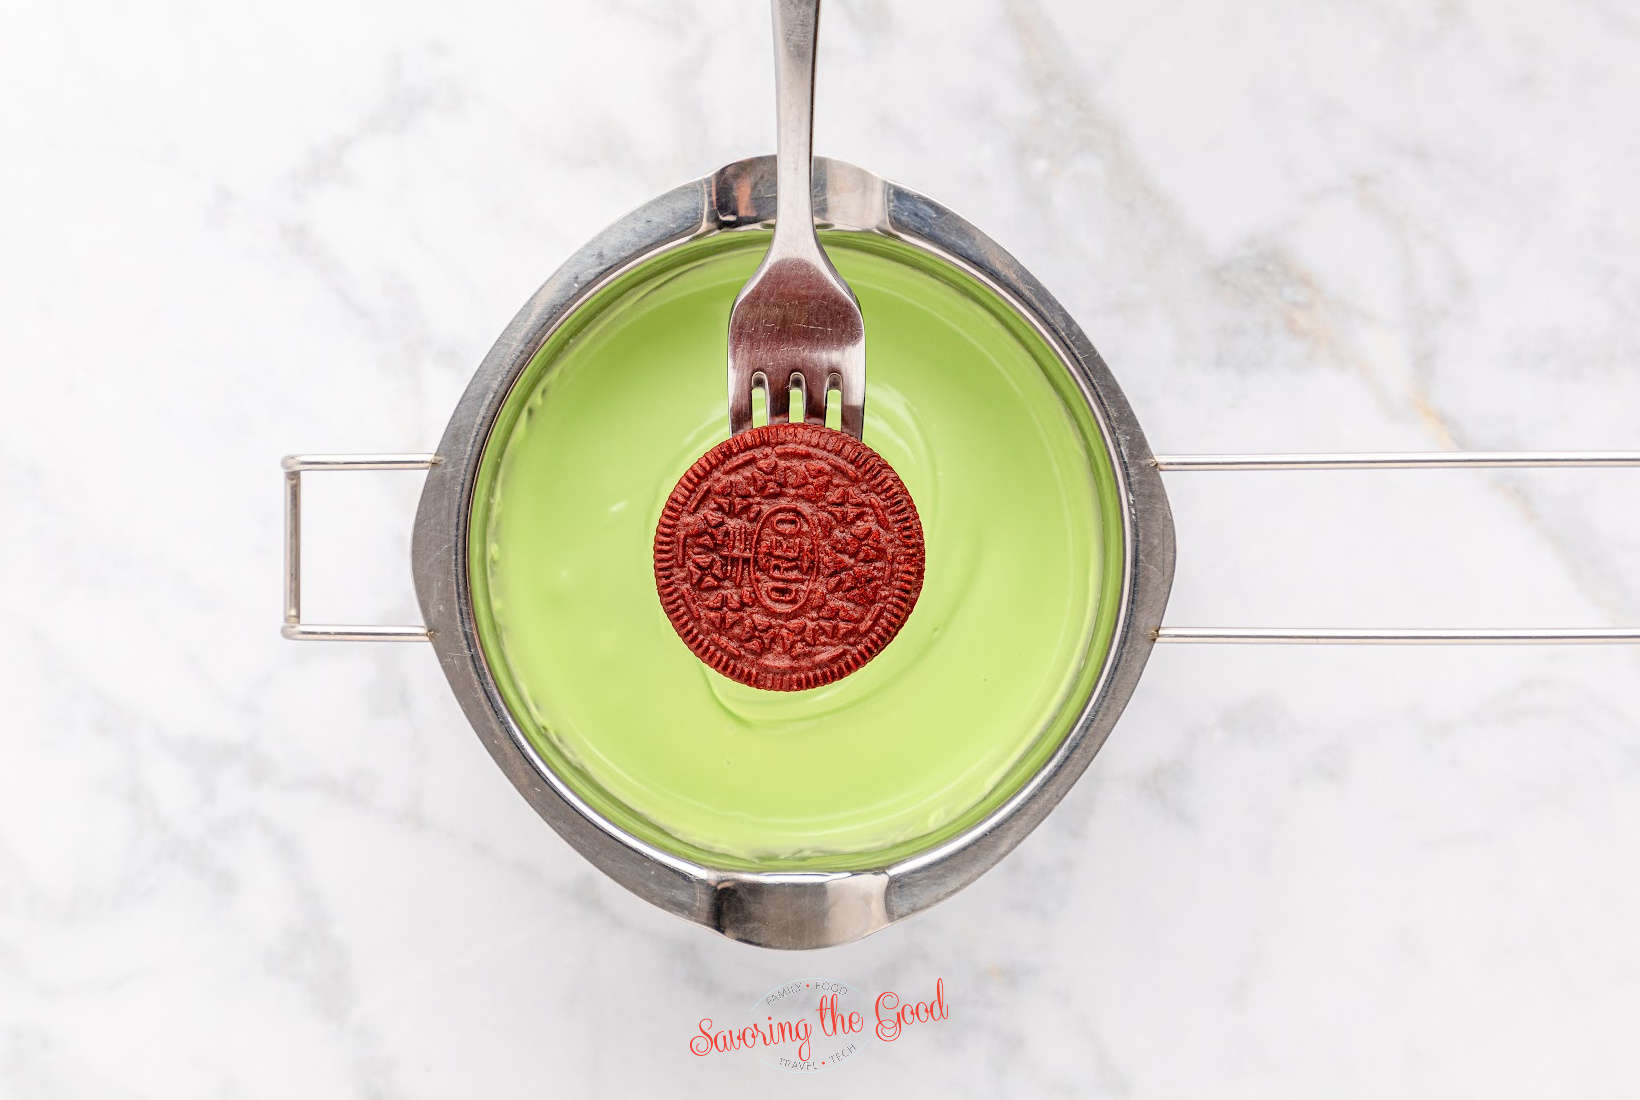 A Grinch-themed oreo cookie with a fork in it.